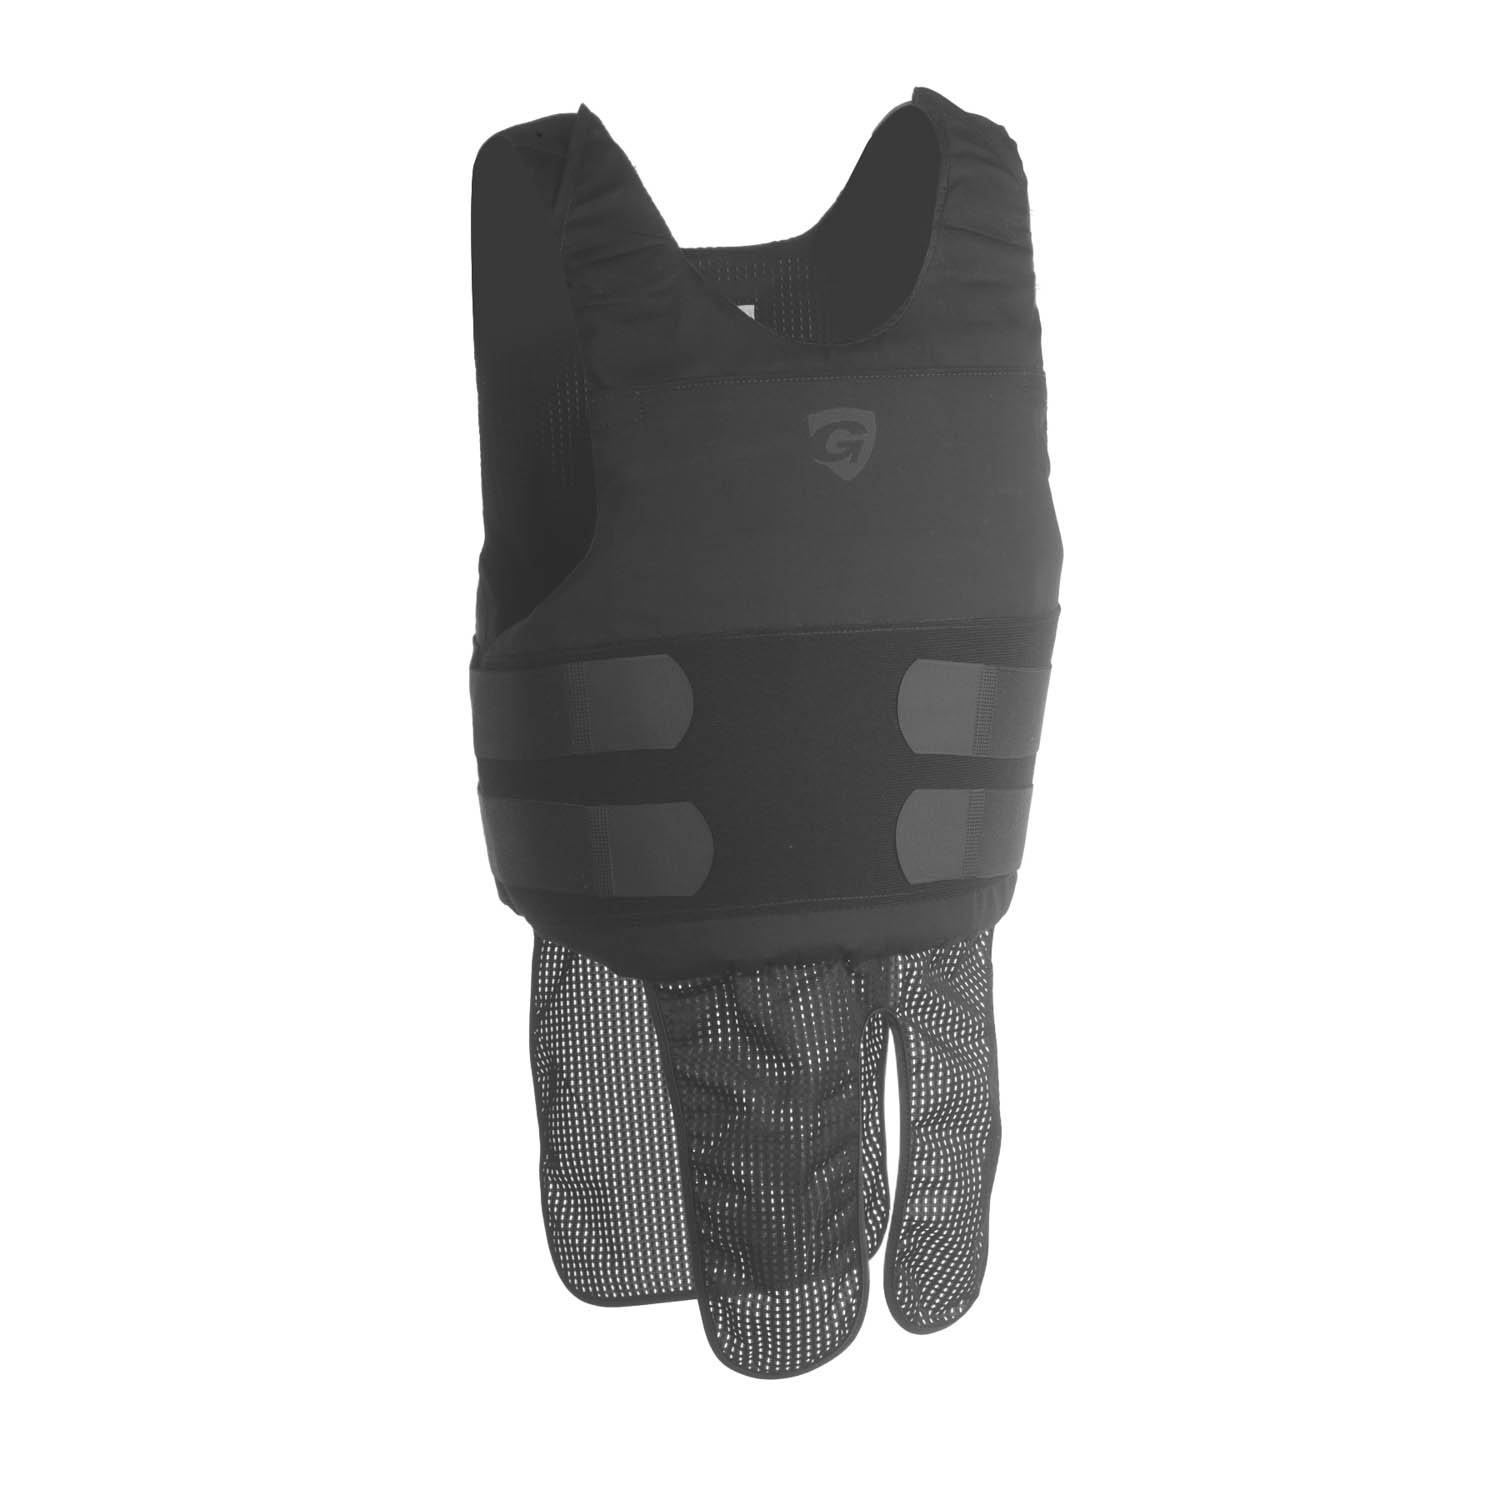 GALLS EXTRA POLY COTTON CARRIER FOR SE BODY ARMOR